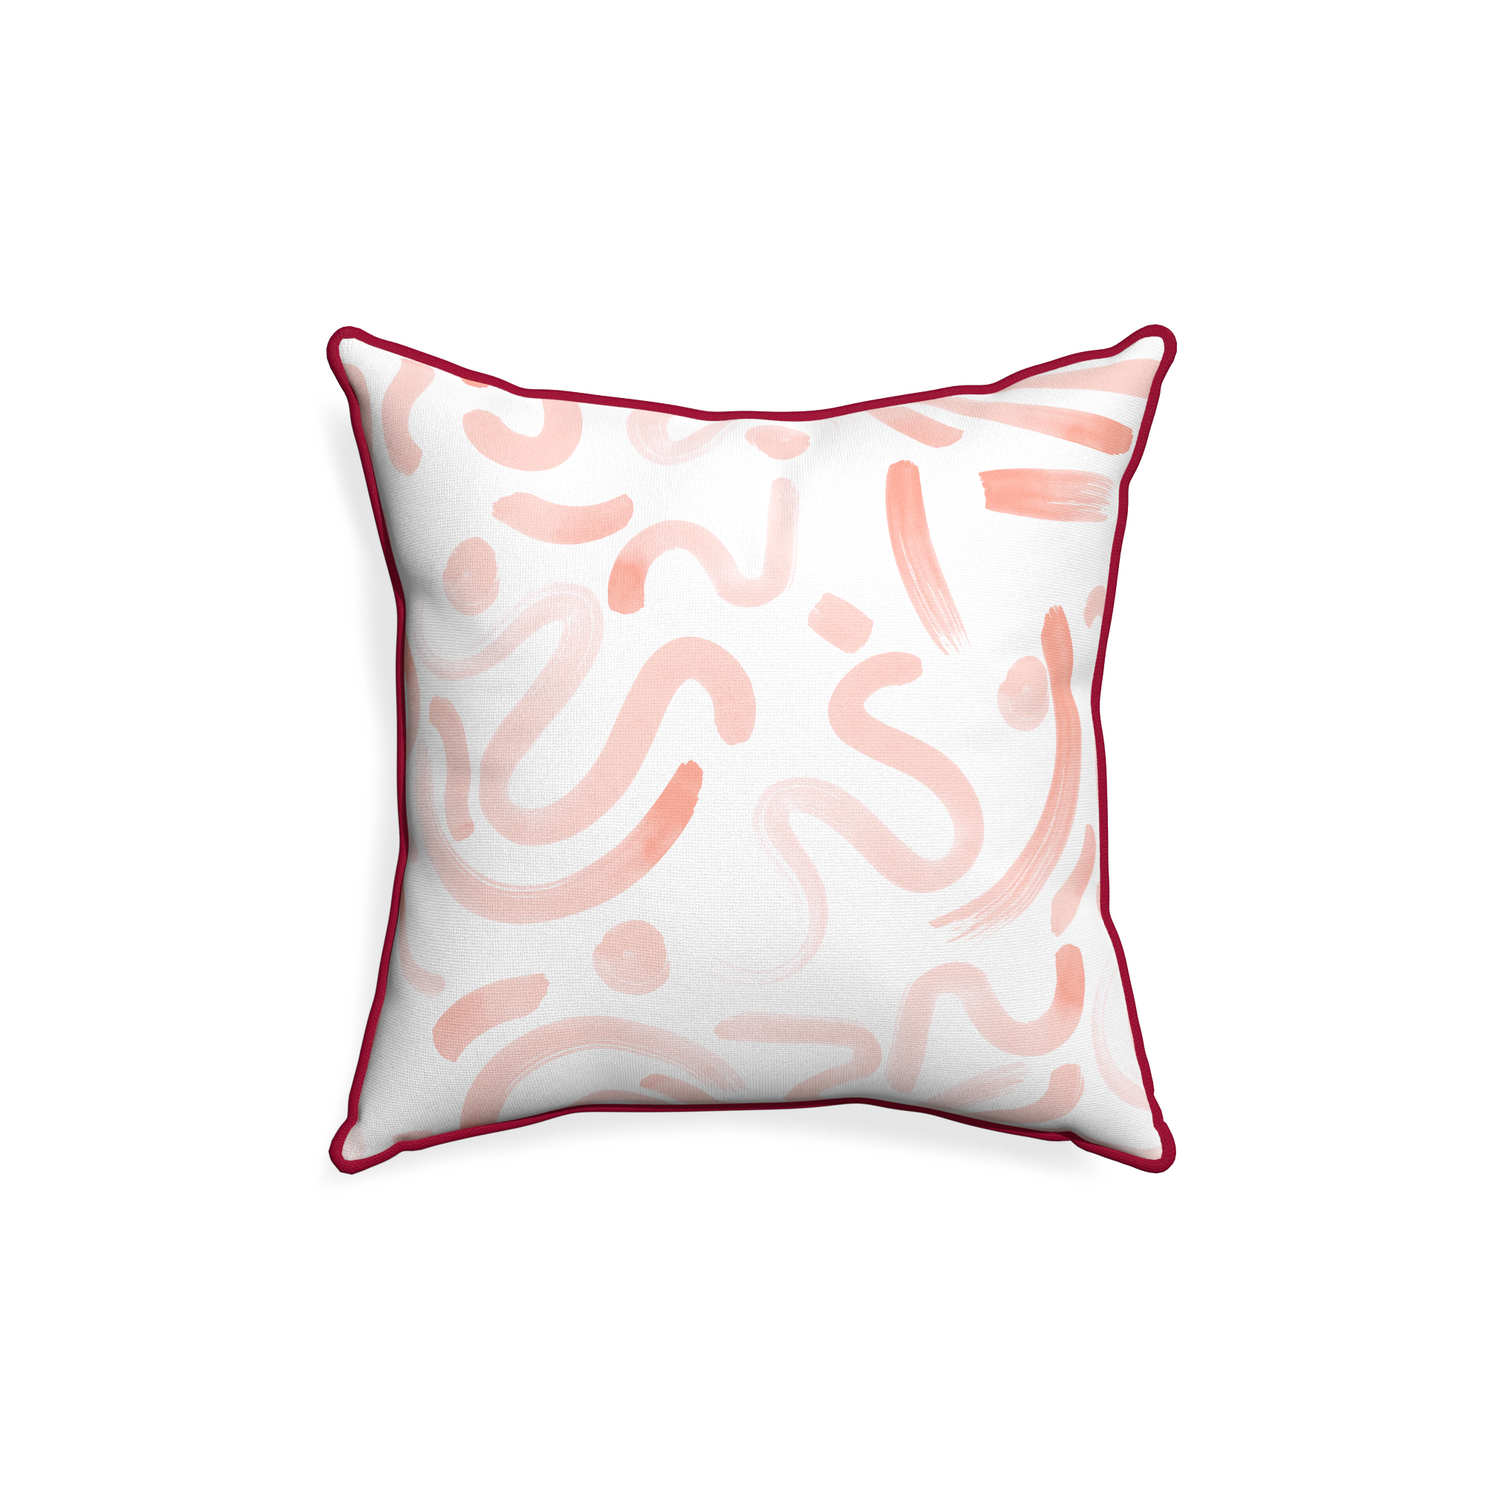 18-square hockney pink custom pink graphicpillow with raspberry piping on white background